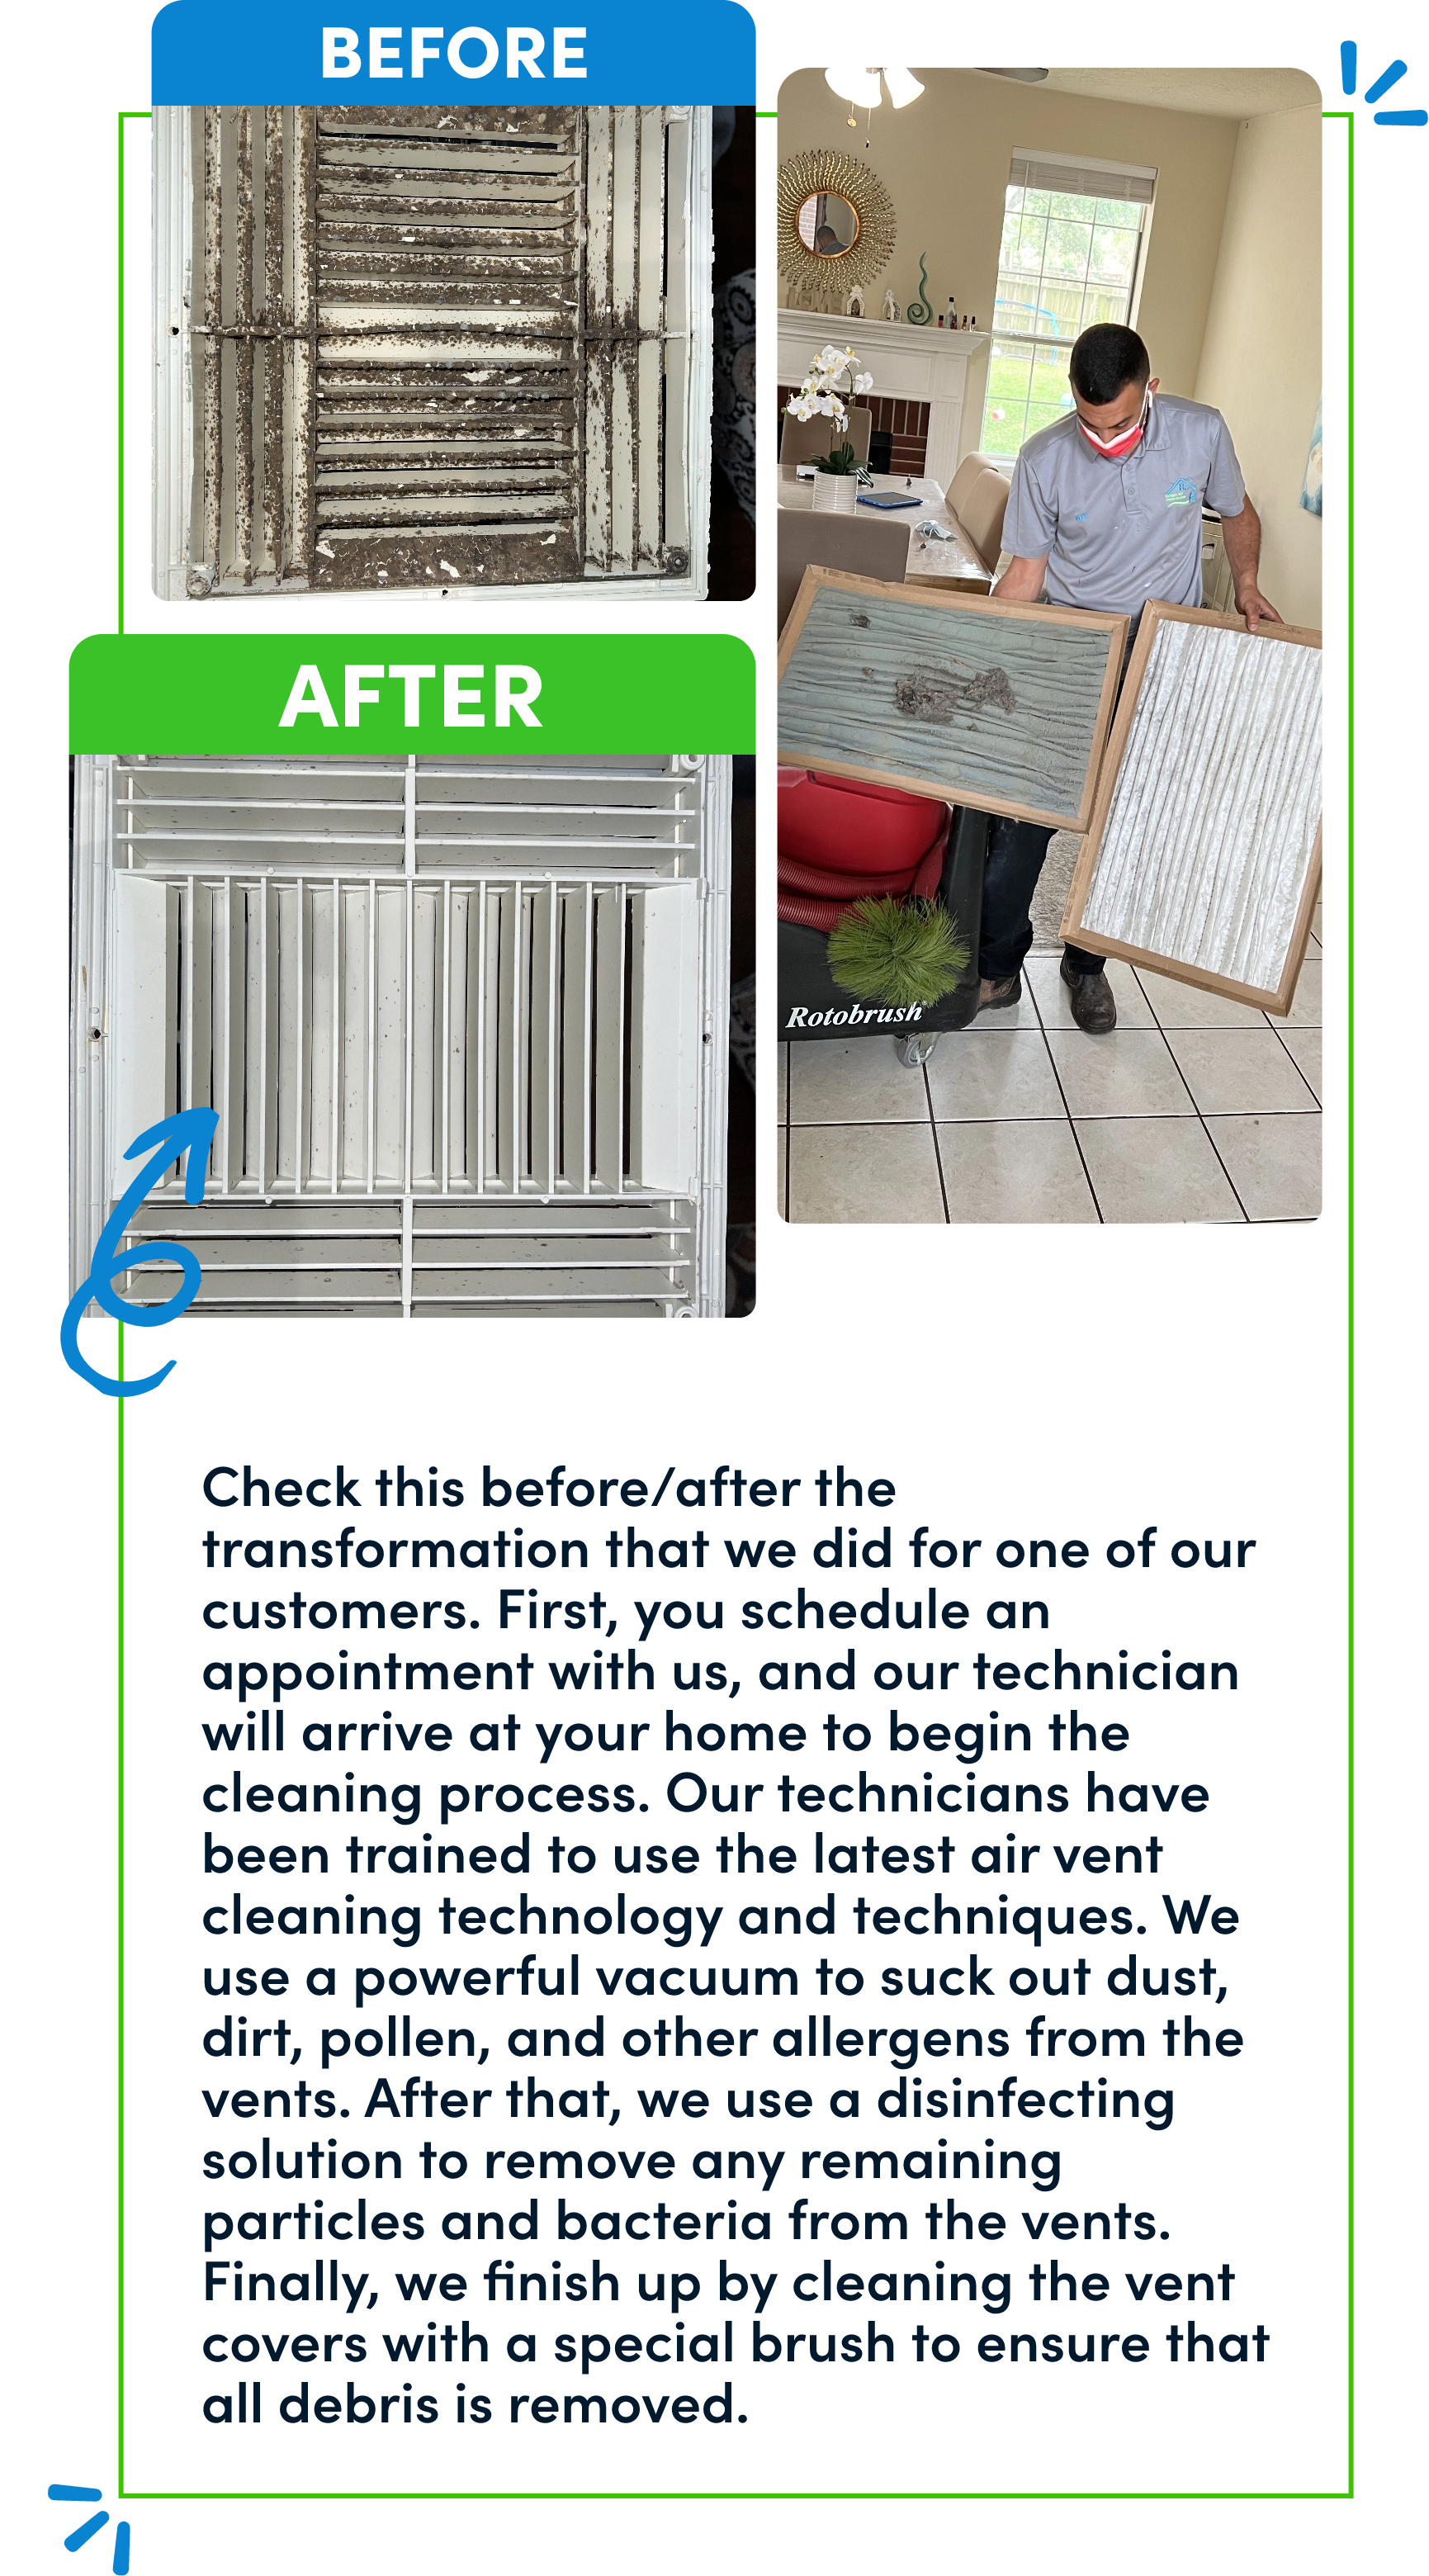 Clean and Green Air Duct Cleaning provides comprehensive air vent cleaning services for homes and businesses in Dallas-Fort Worth, Houston, and Austin, Texas. Trust us for superior indoor air quality and customer satisfaction.